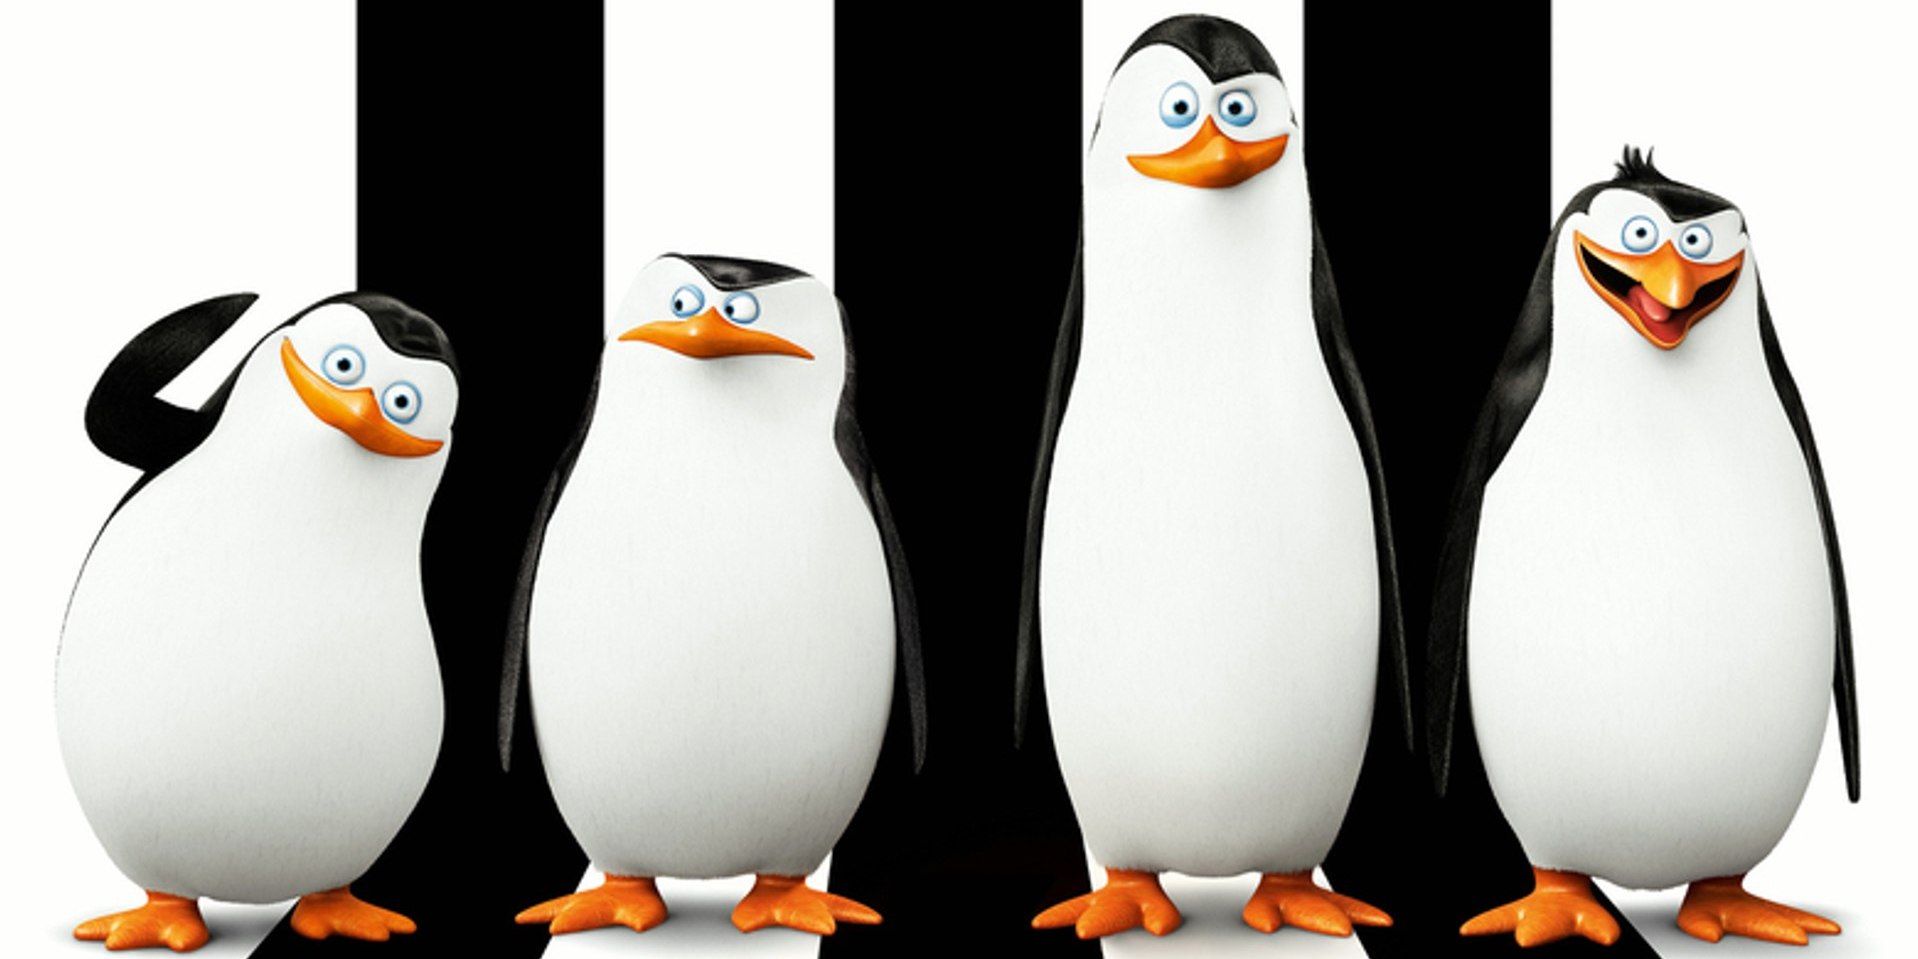 Black and white image of Penguins of Madagascar with penguins standing side by side.